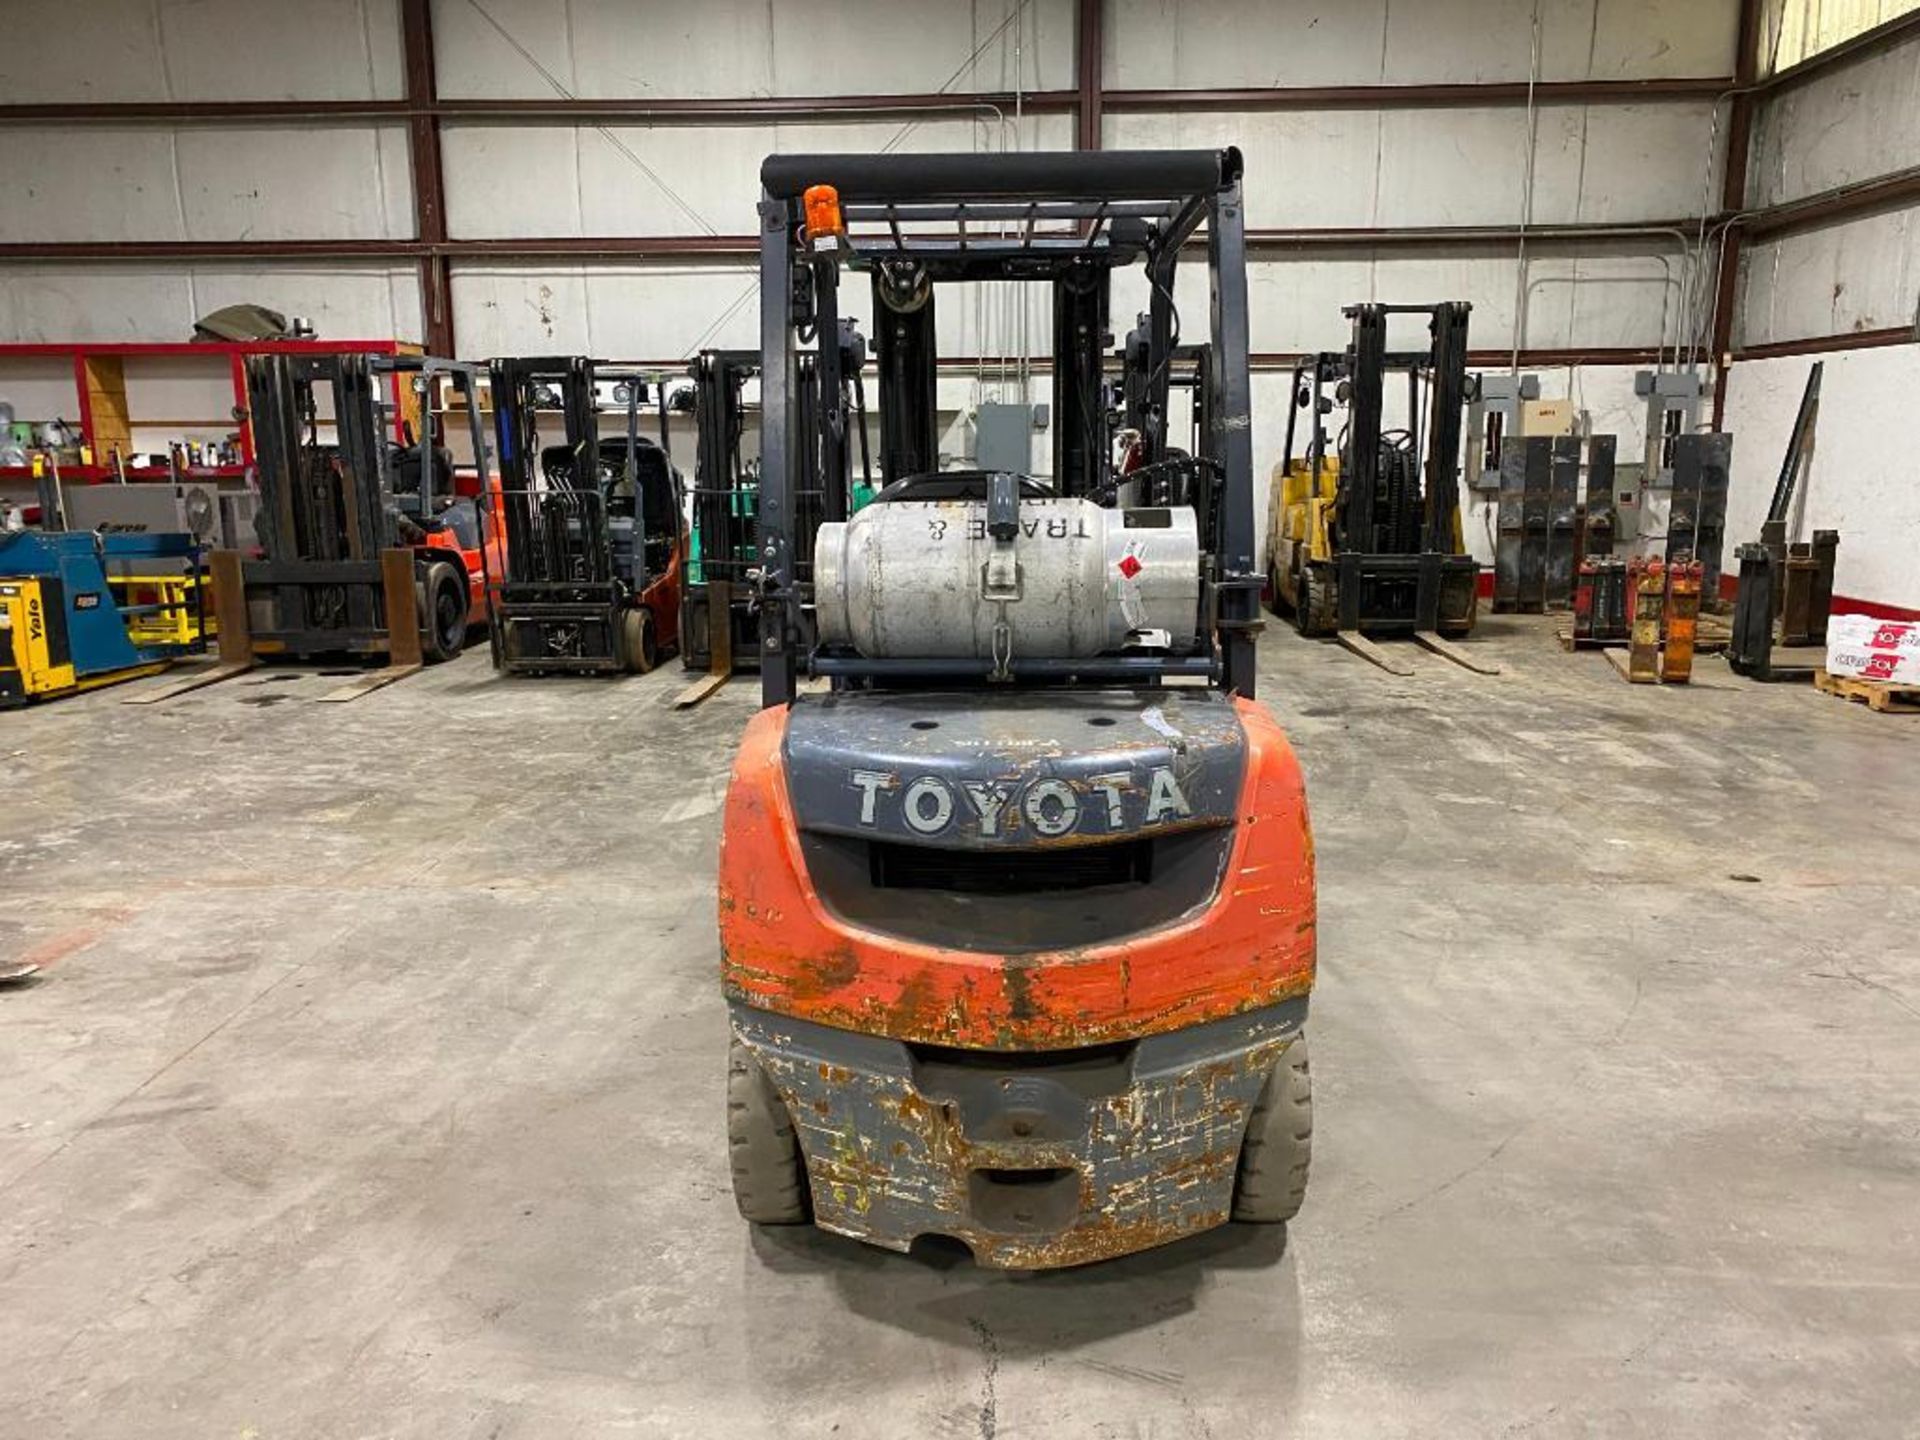 2017 Toyota 5,000-LB. Capacity Forklift, Model 8FGU25, S/N 83598, LPG, Solid Pneumatic Tires, 3-Stag - Image 4 of 5